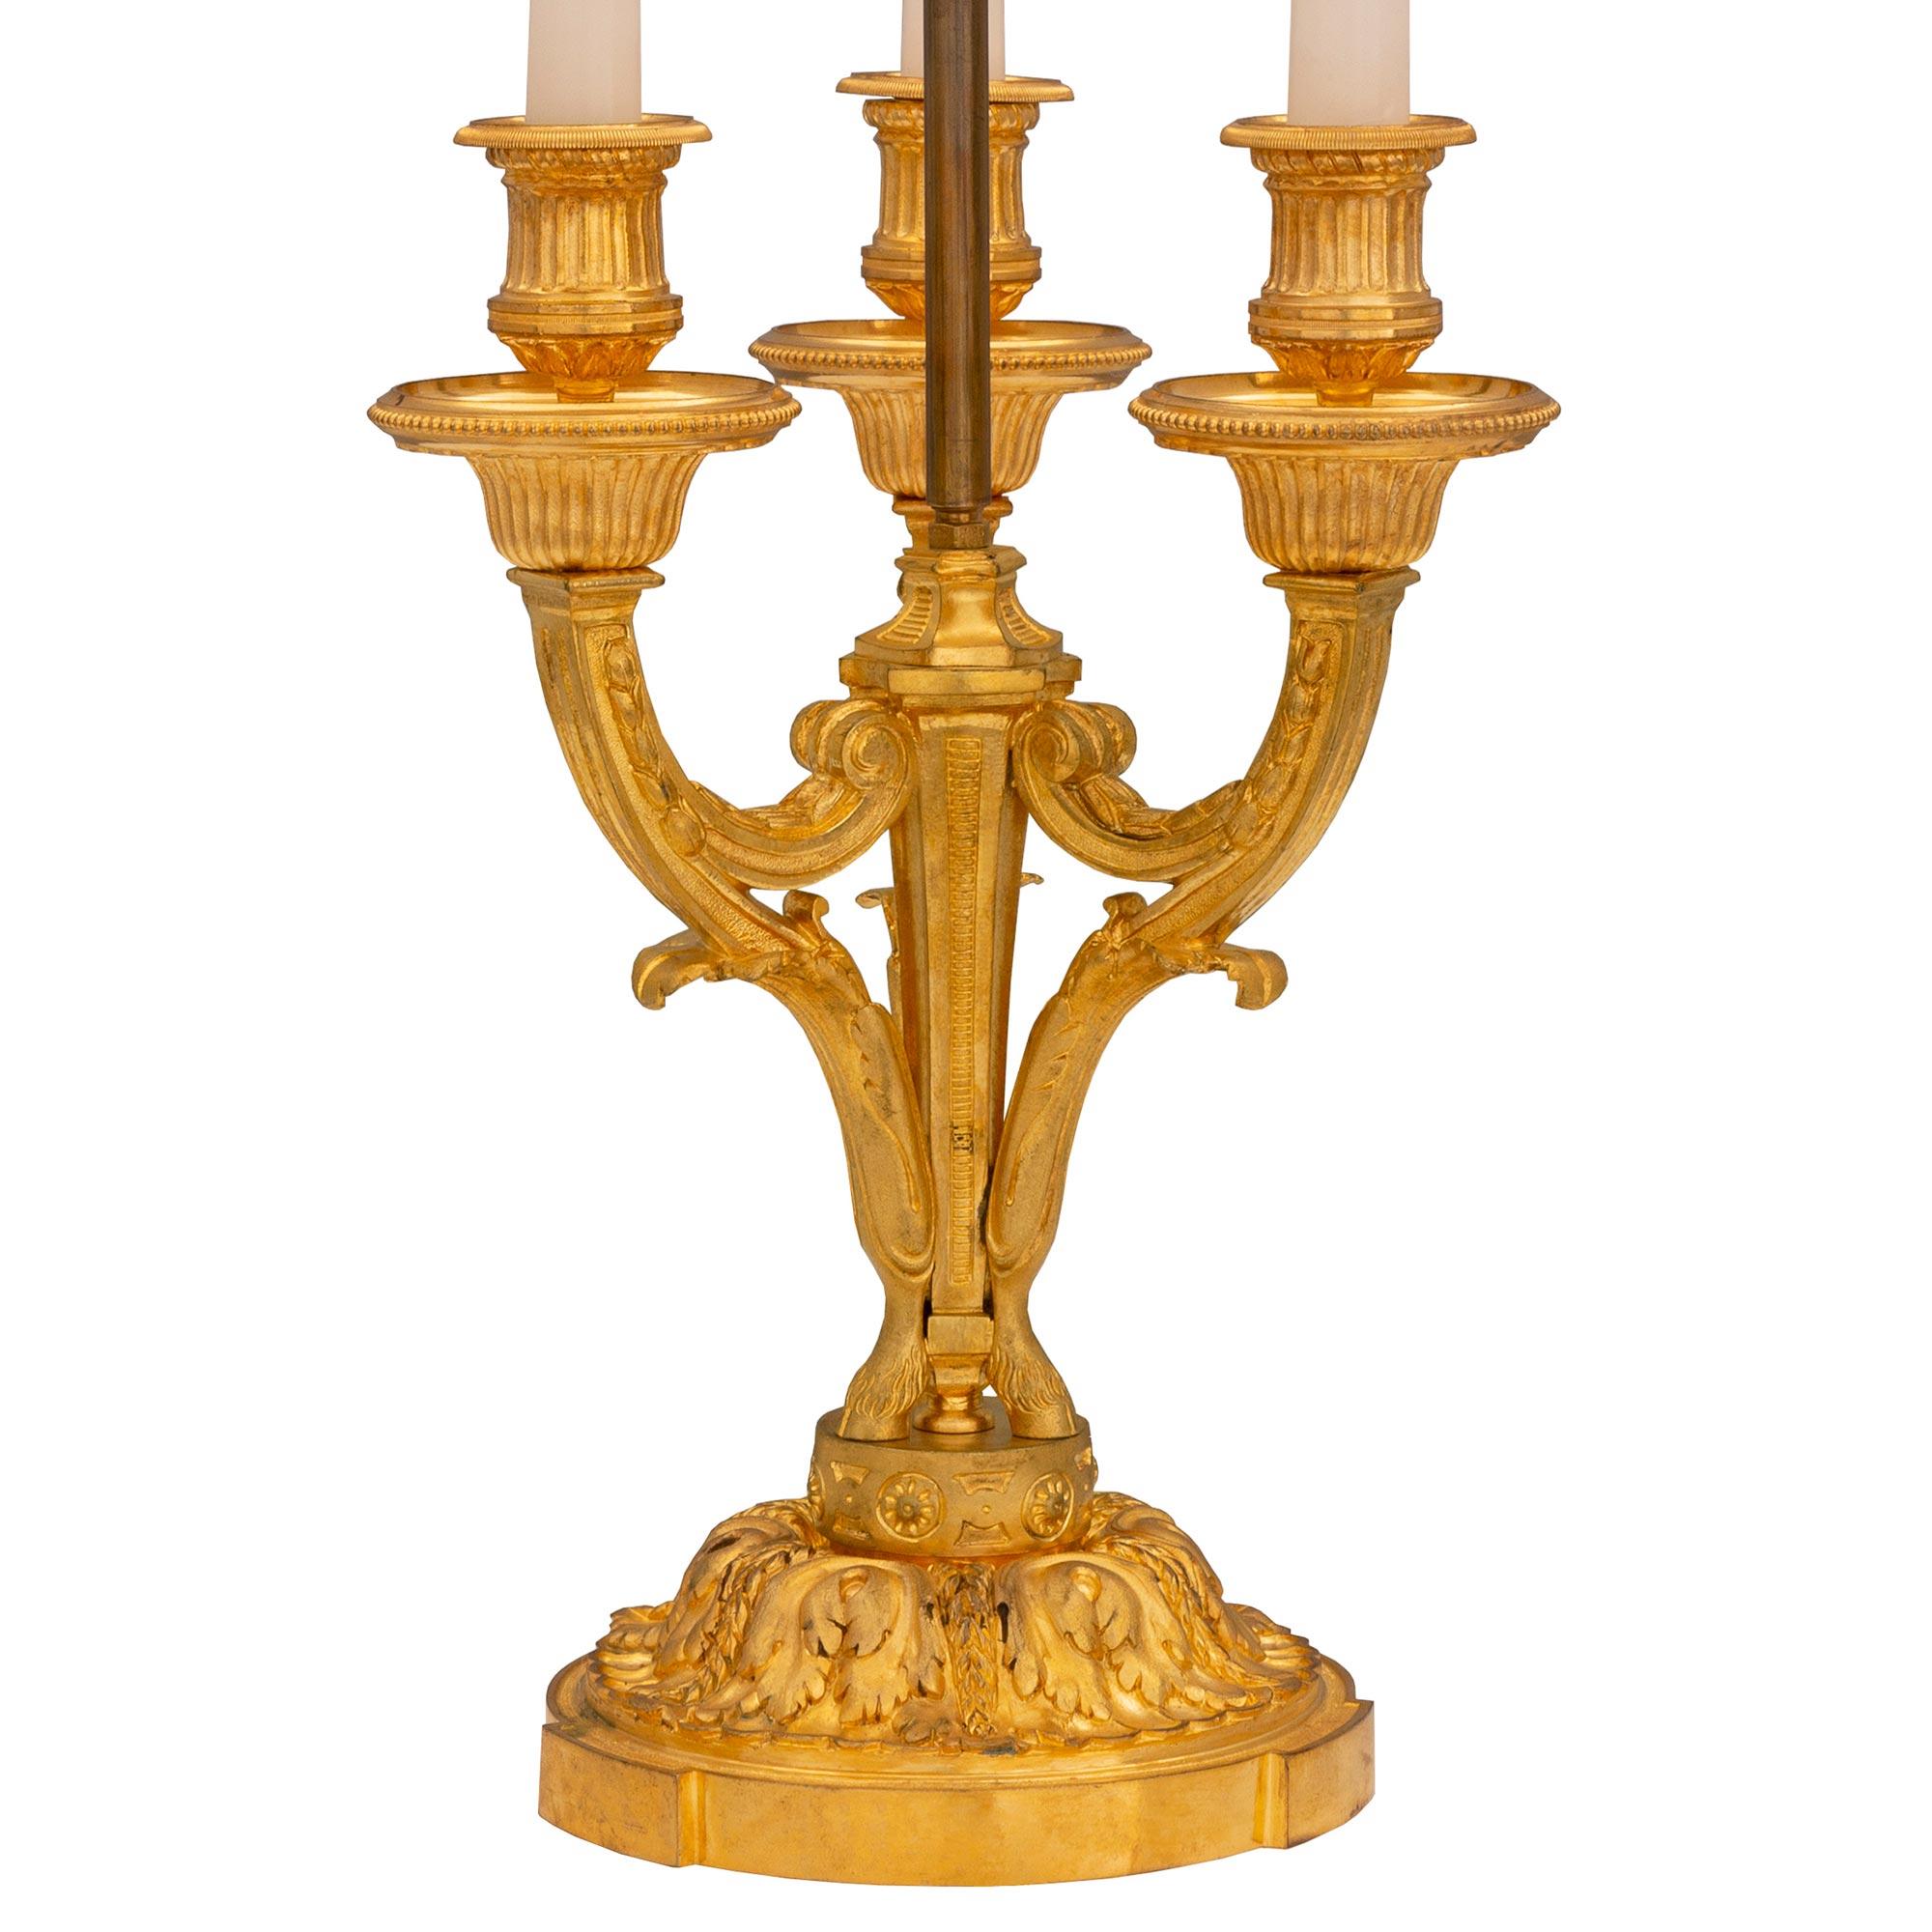 An elegant French 19th century Louis XVI st. ormolu lamp. The three armed lamp is raised by a fine circular mottled base with large beautiful richly chased acanthus leaves. At the center are three lightly curved scrolled supports adorned with